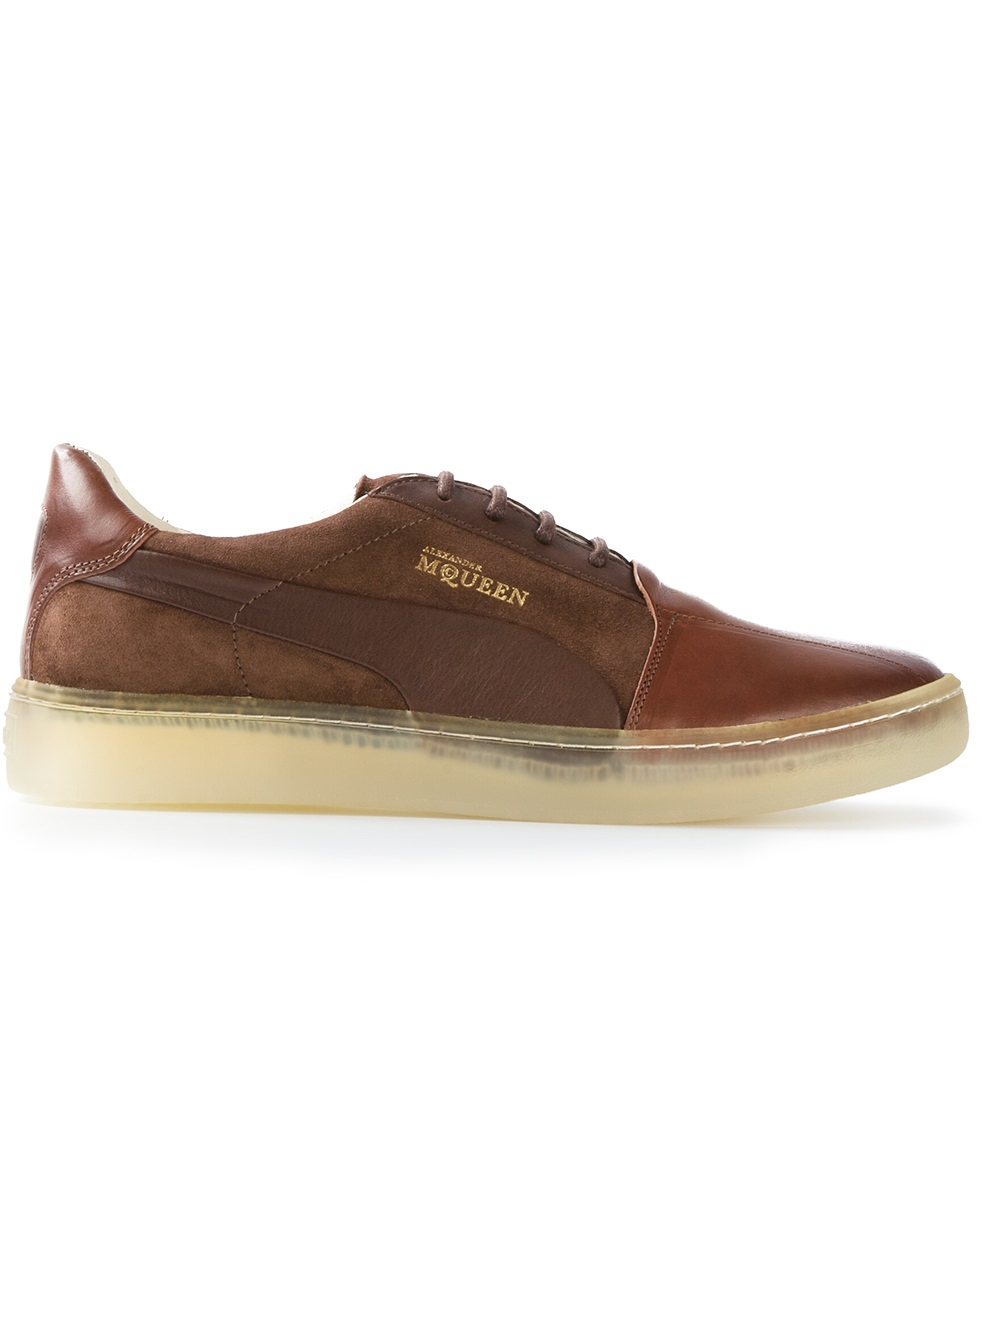 puma brown leather trainers